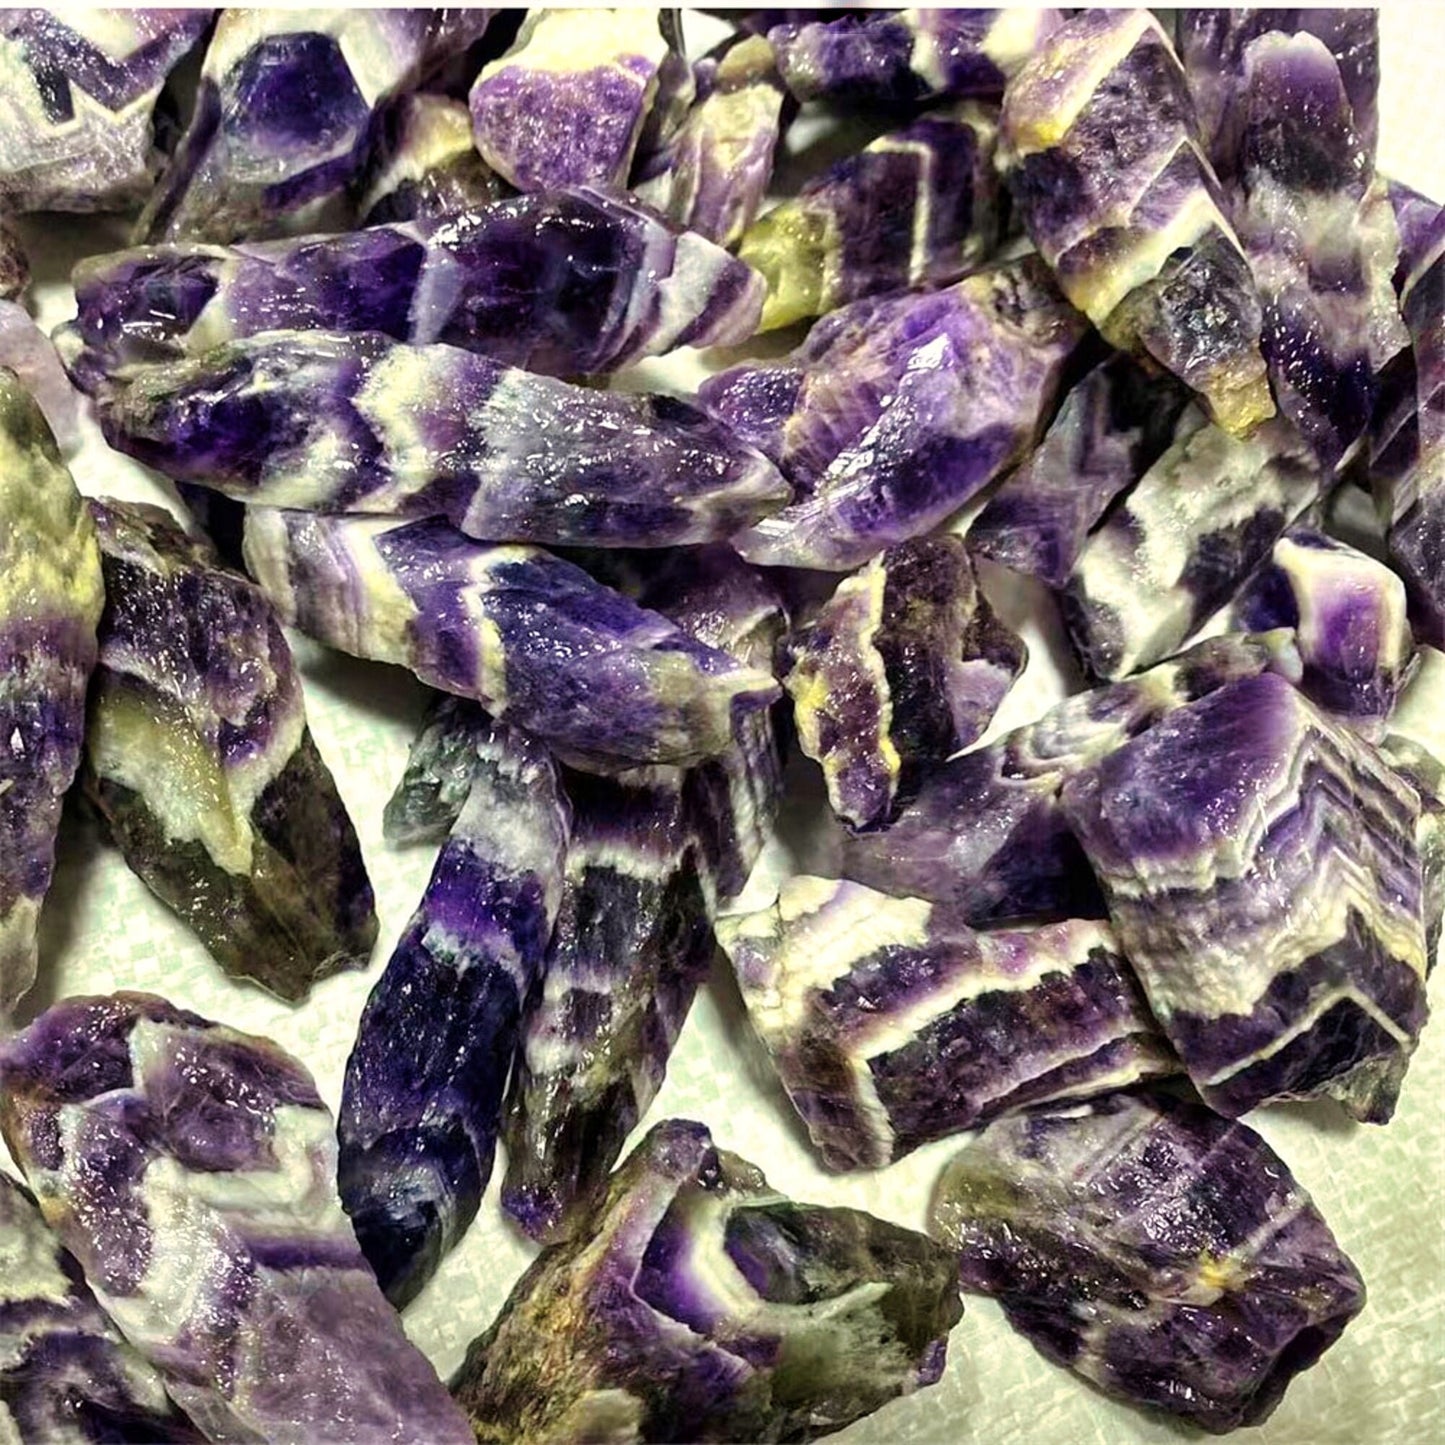 Natural Amethyst Crystal Rough Stone for Energy Healing & Mineral Specimen